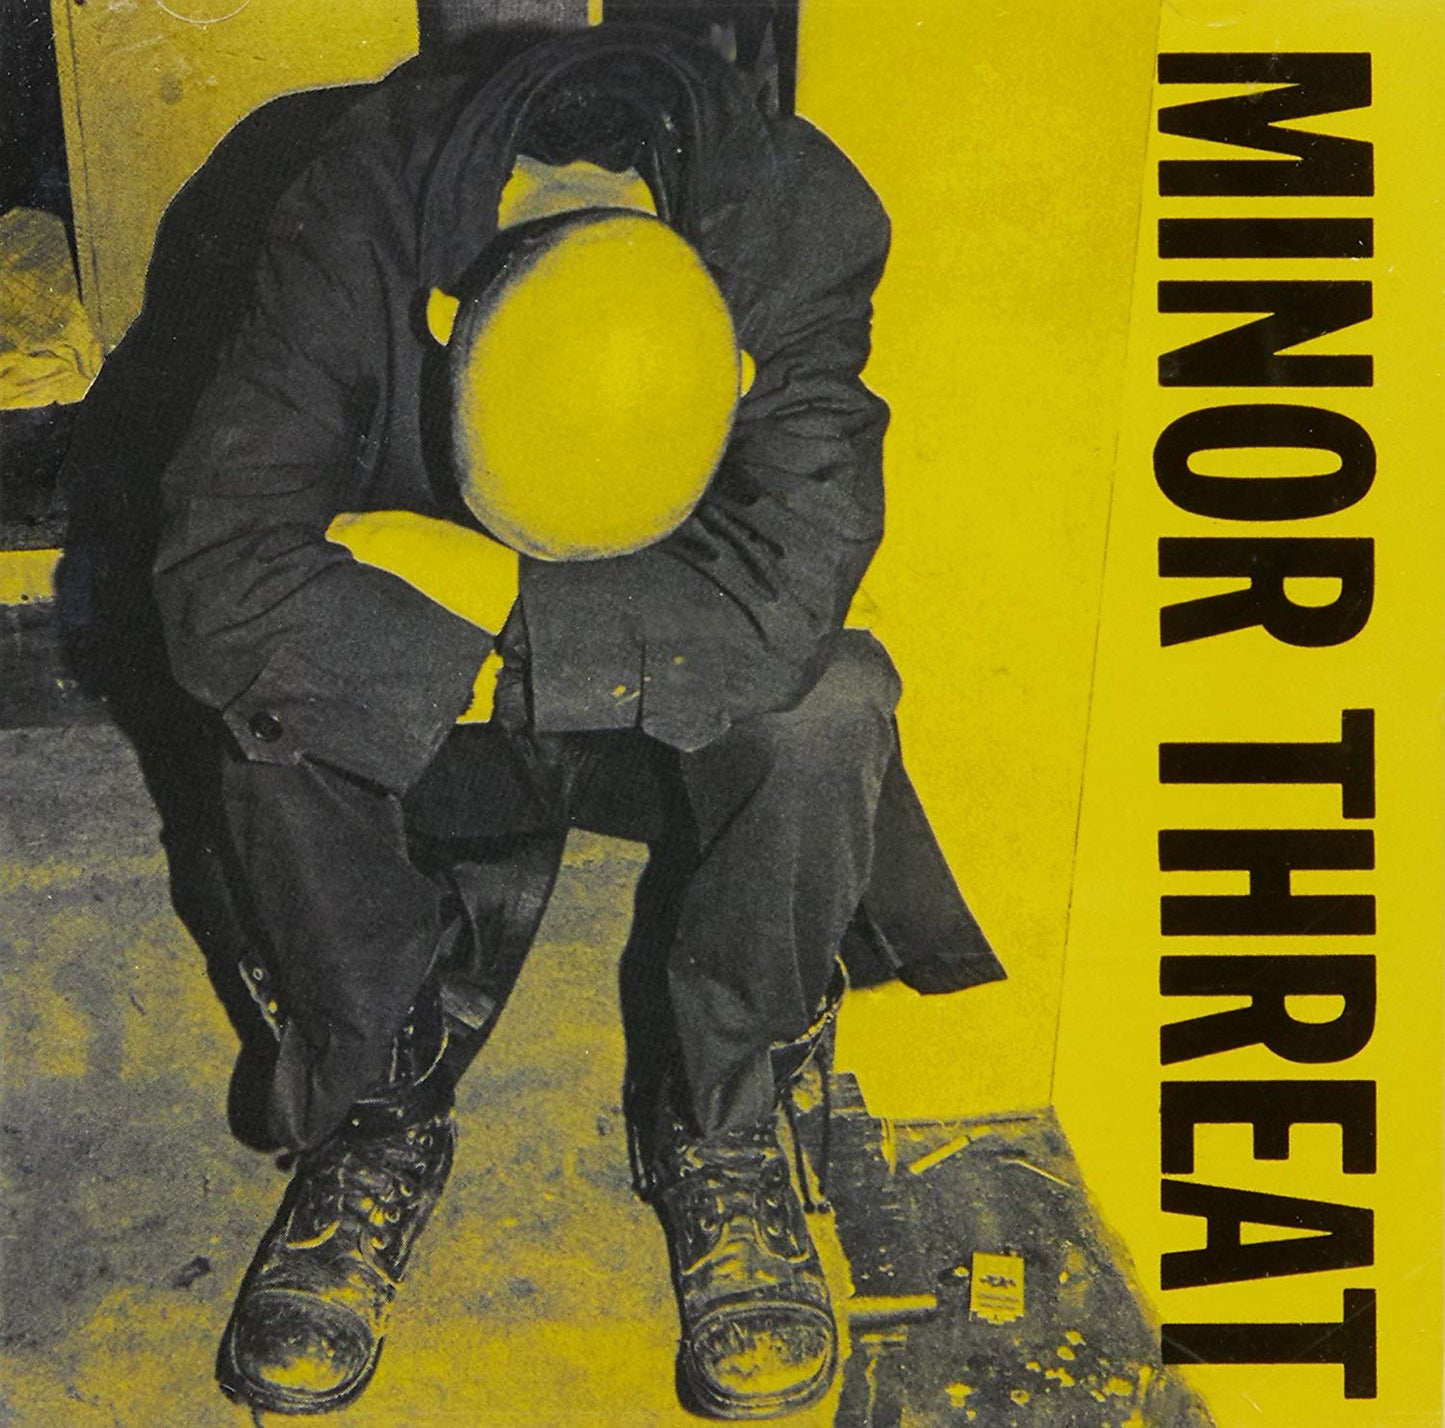 Minor Threat - Complete Discography - CD